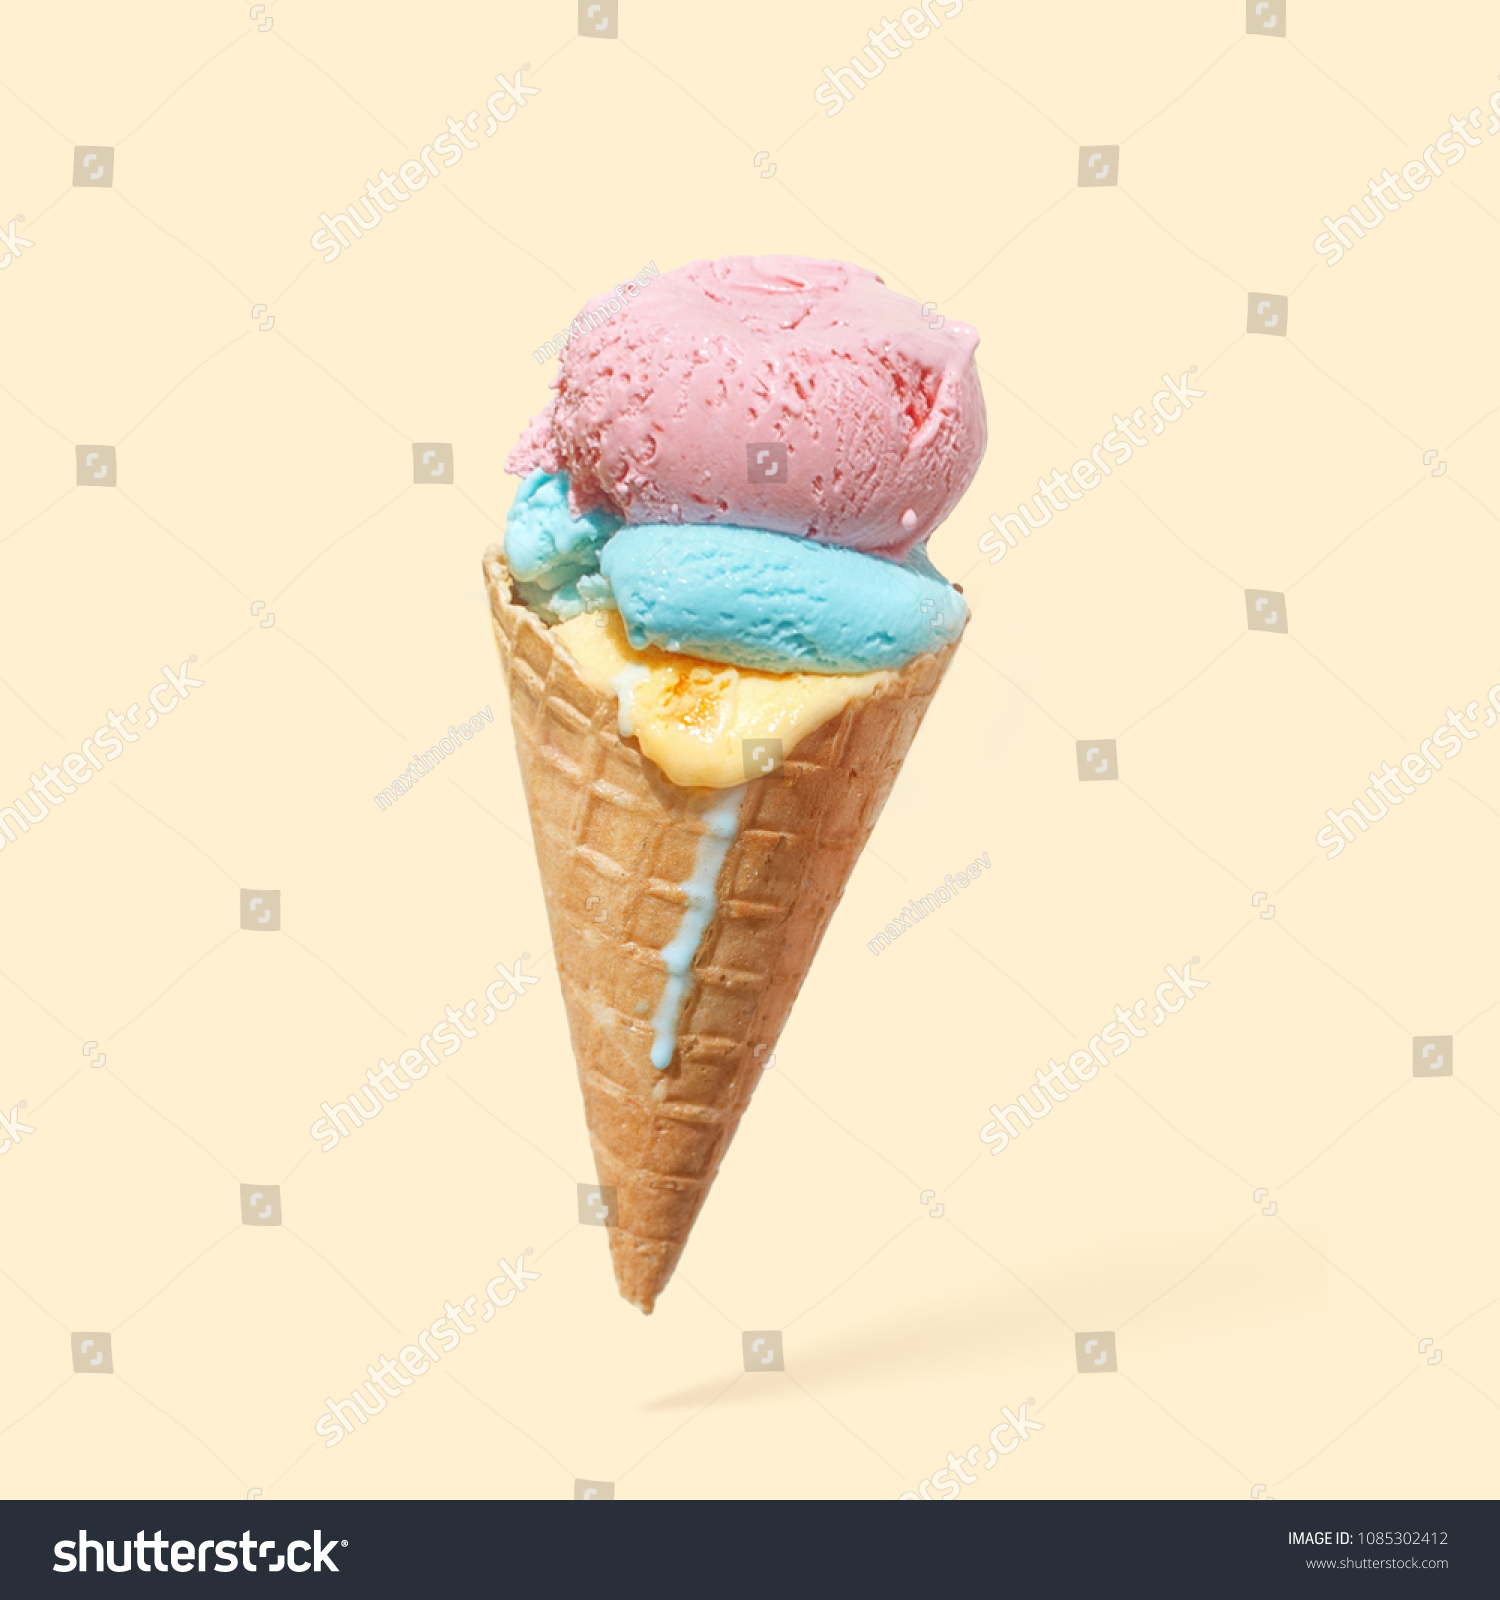 Download Cone Colorful Ice Cream On Yellow Food And Drink Stock Image 1085302412 PSD Mockup Templates